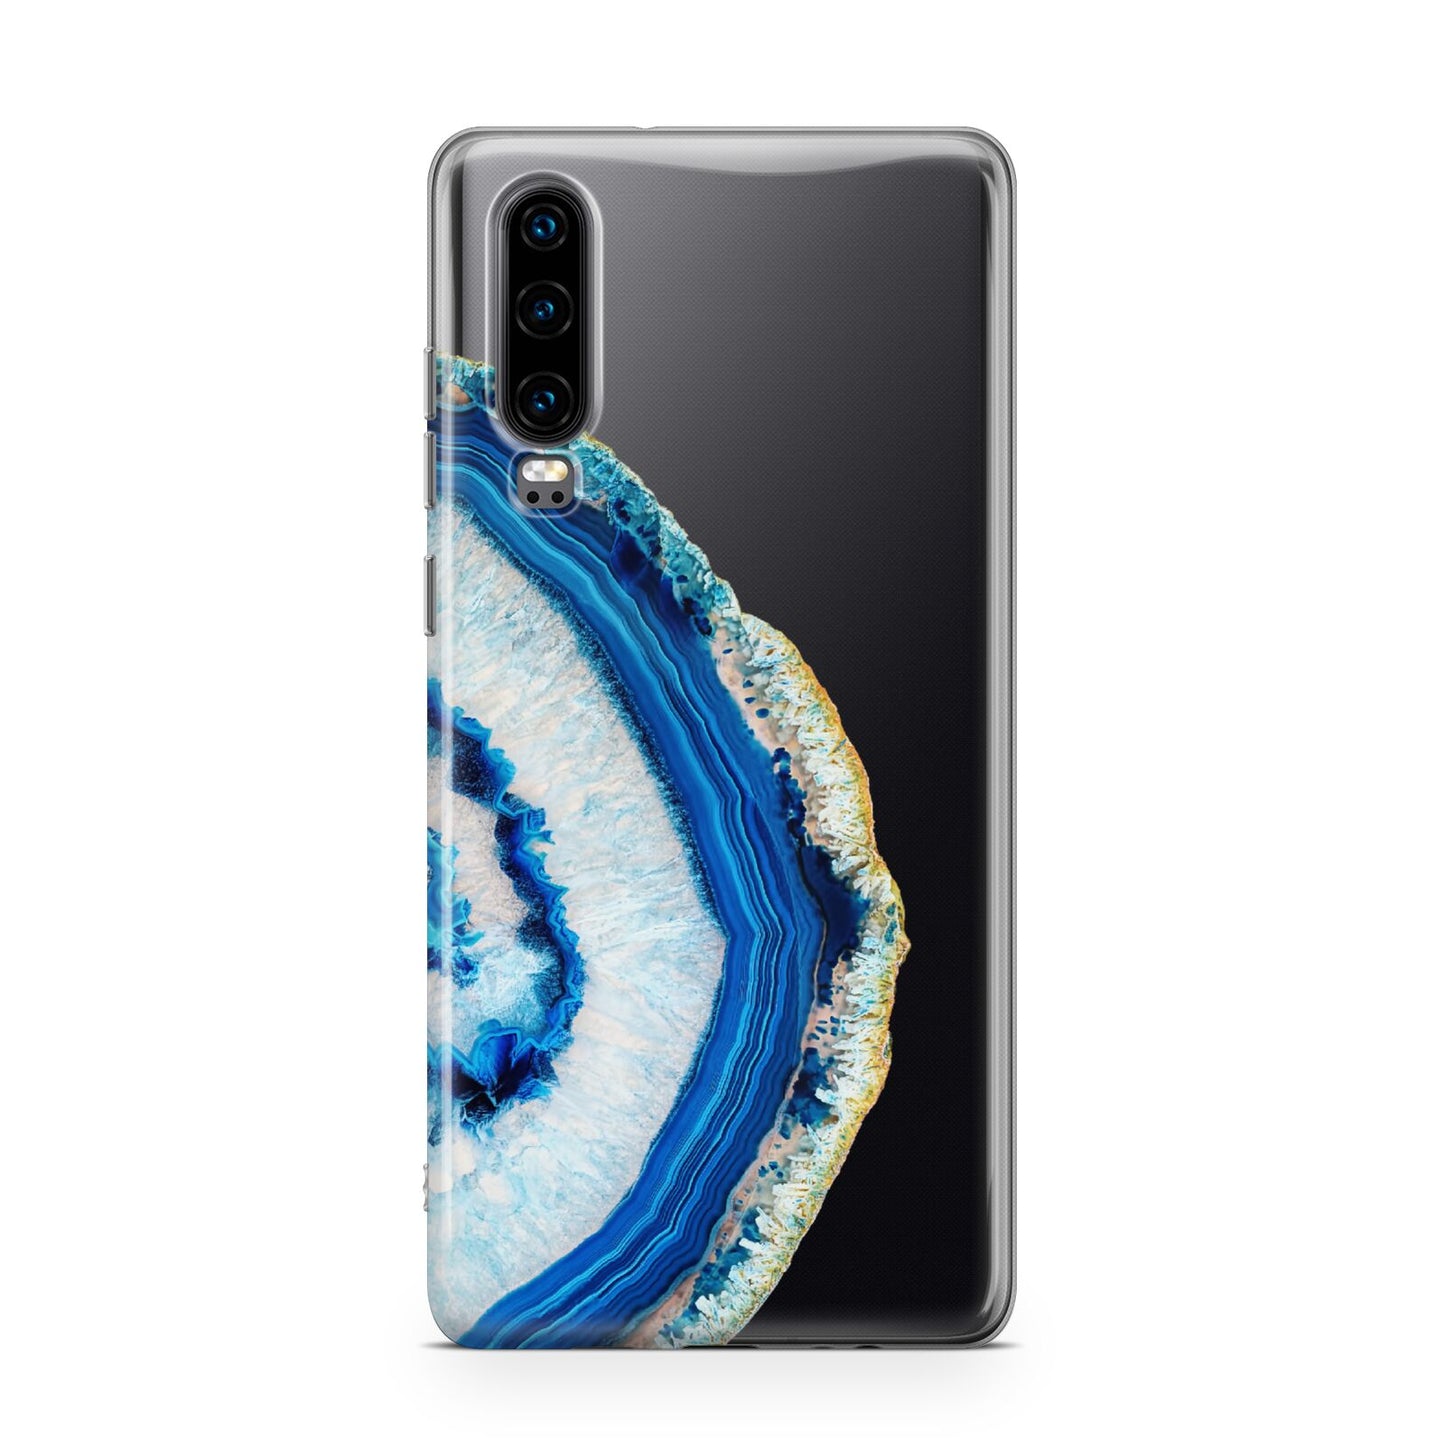 Agate Dark Blue and Turquoise Huawei P30 Phone Case